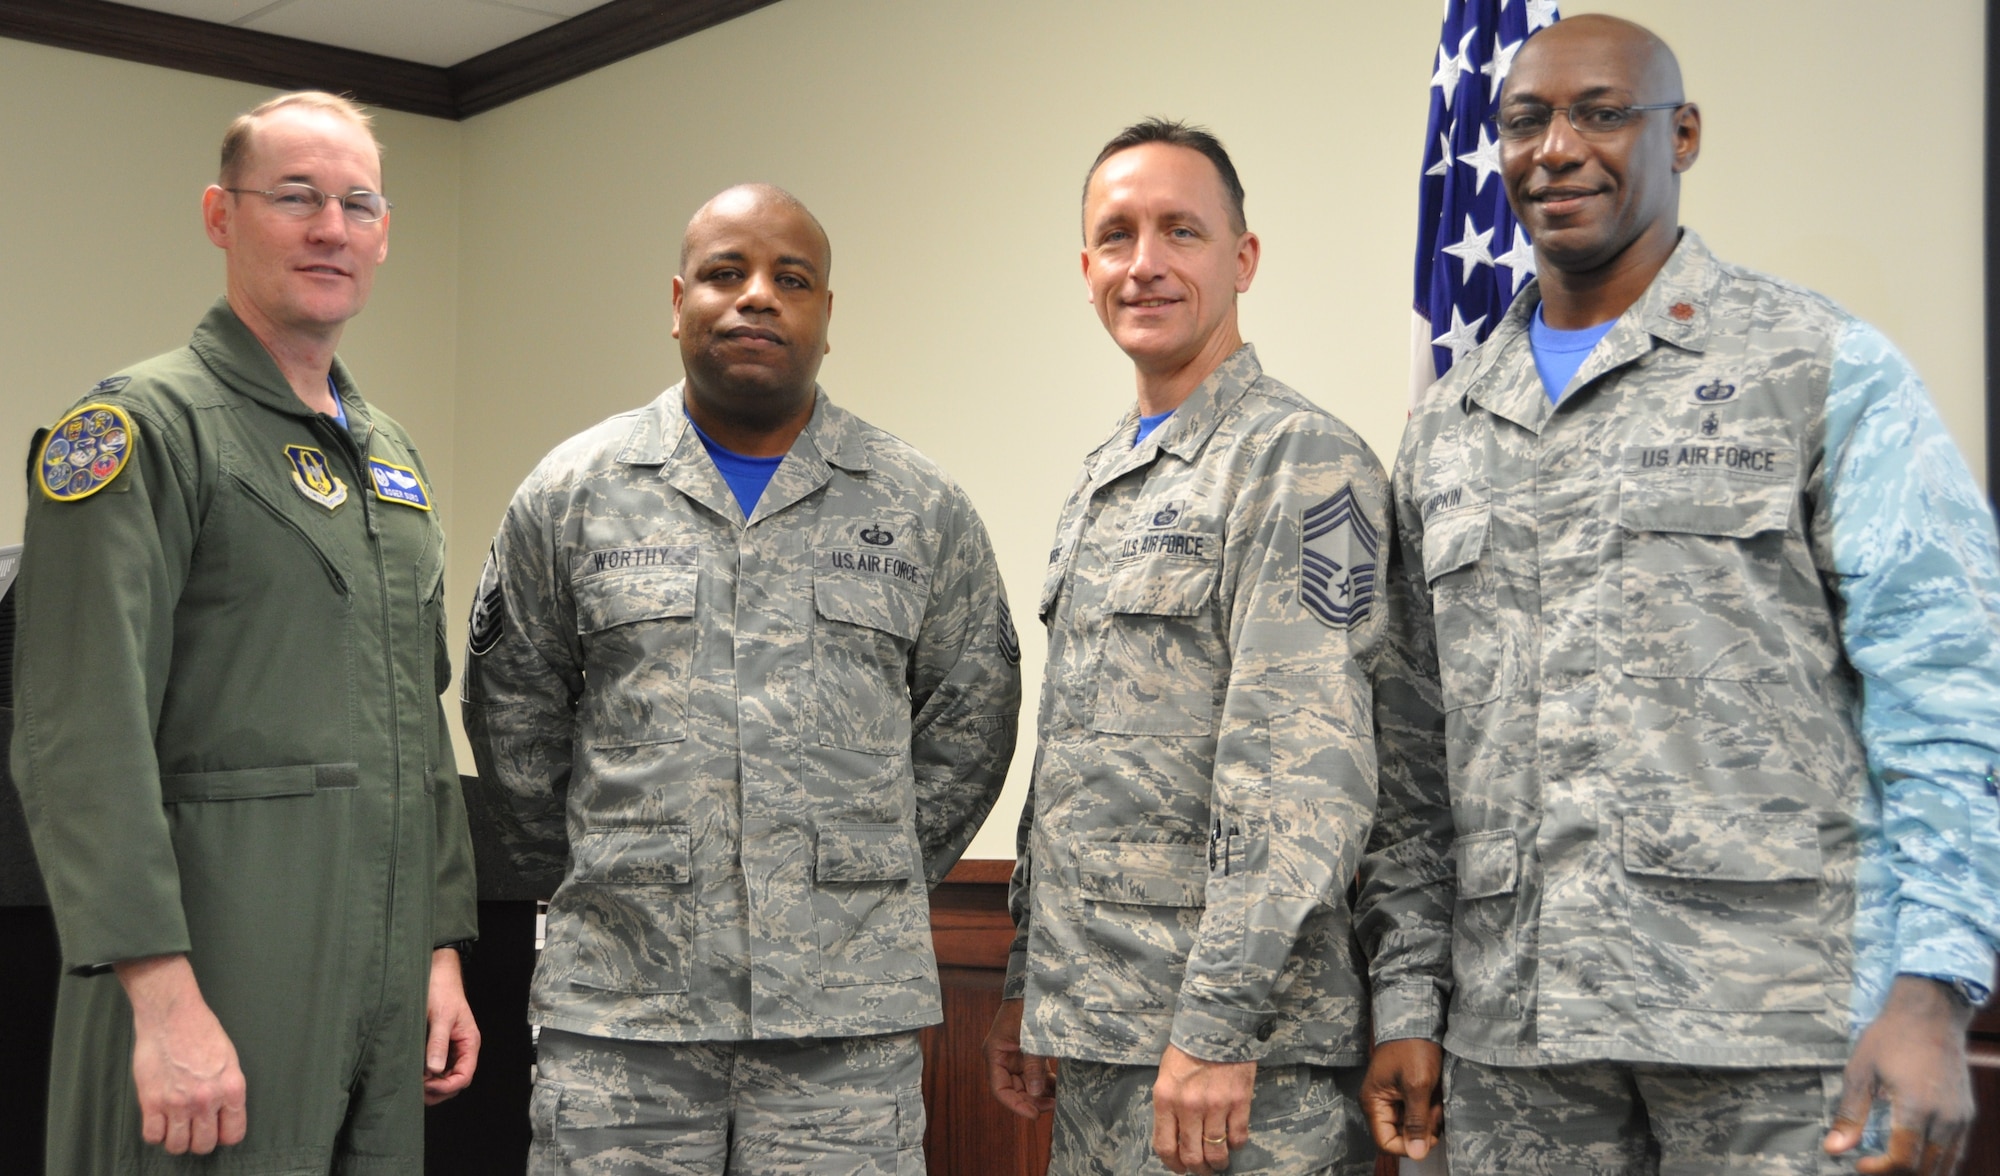 Master Sgt. Derrick Worthy (2nd from left) Stands with Col. Roger Suro, 340th FTG commander, Maj. Thallas Lumpkin, 340th FTG comptroller and group superintendent, Chief Master Sgt. Jimmie Morris during the group’s Dec. 1 MUTA at Joint Base San Antonio-Randolph, Texas  to commemorate his  receipt of Department of Defense certification in financial management during the group’s Dec. 1 MUTA at Joint Base San Antonio-Randolph, Texas (Photo by Janis El Shabazz).